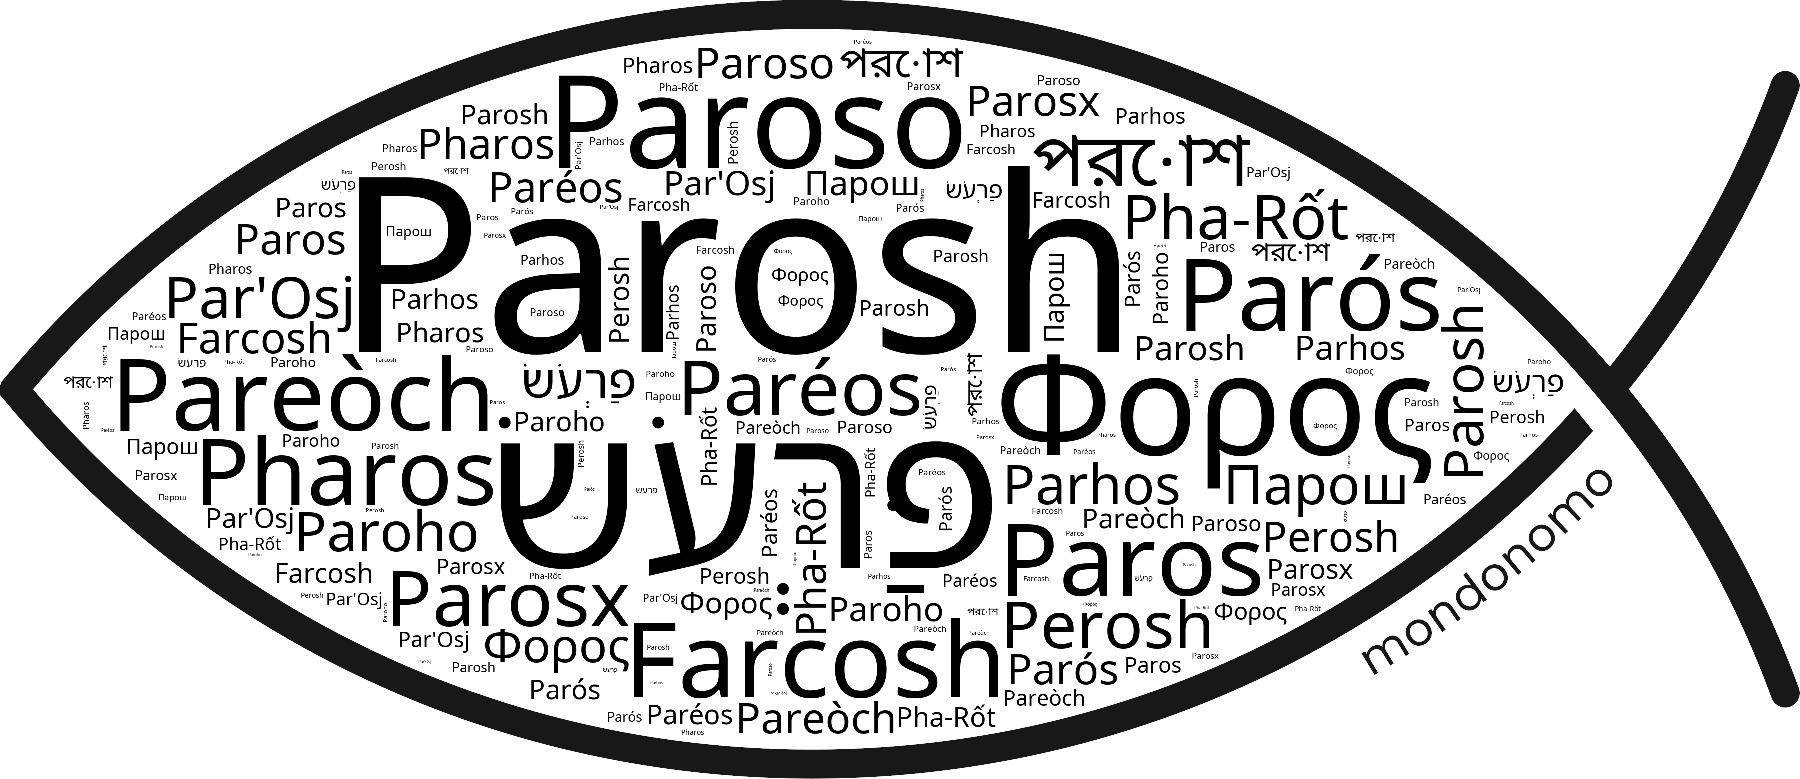 Name Parosh in the world's Bibles